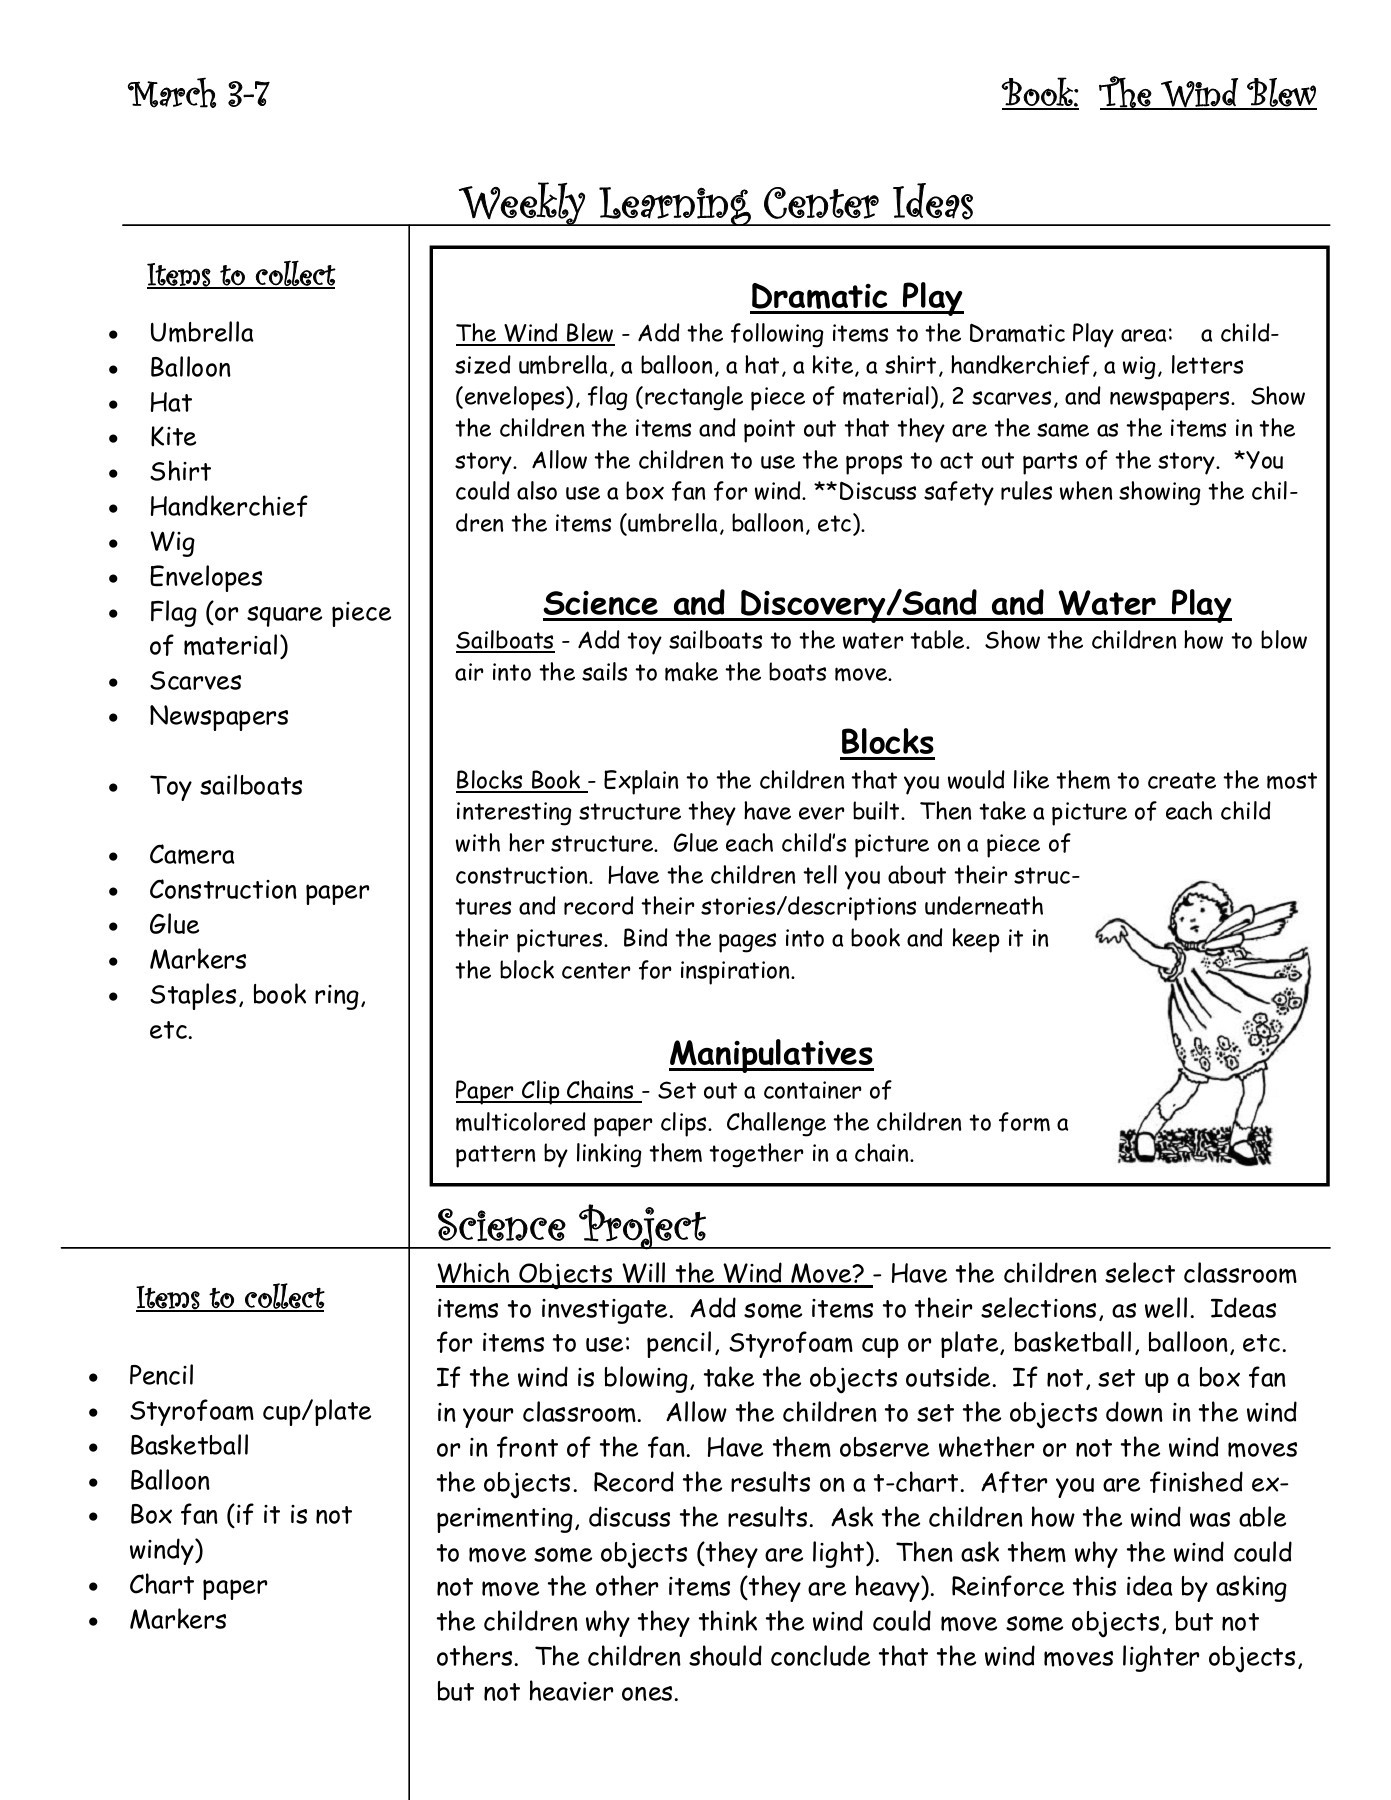 The Wind Blew Lesson Plans - Pressomatic Pages 1 - 27 - Text